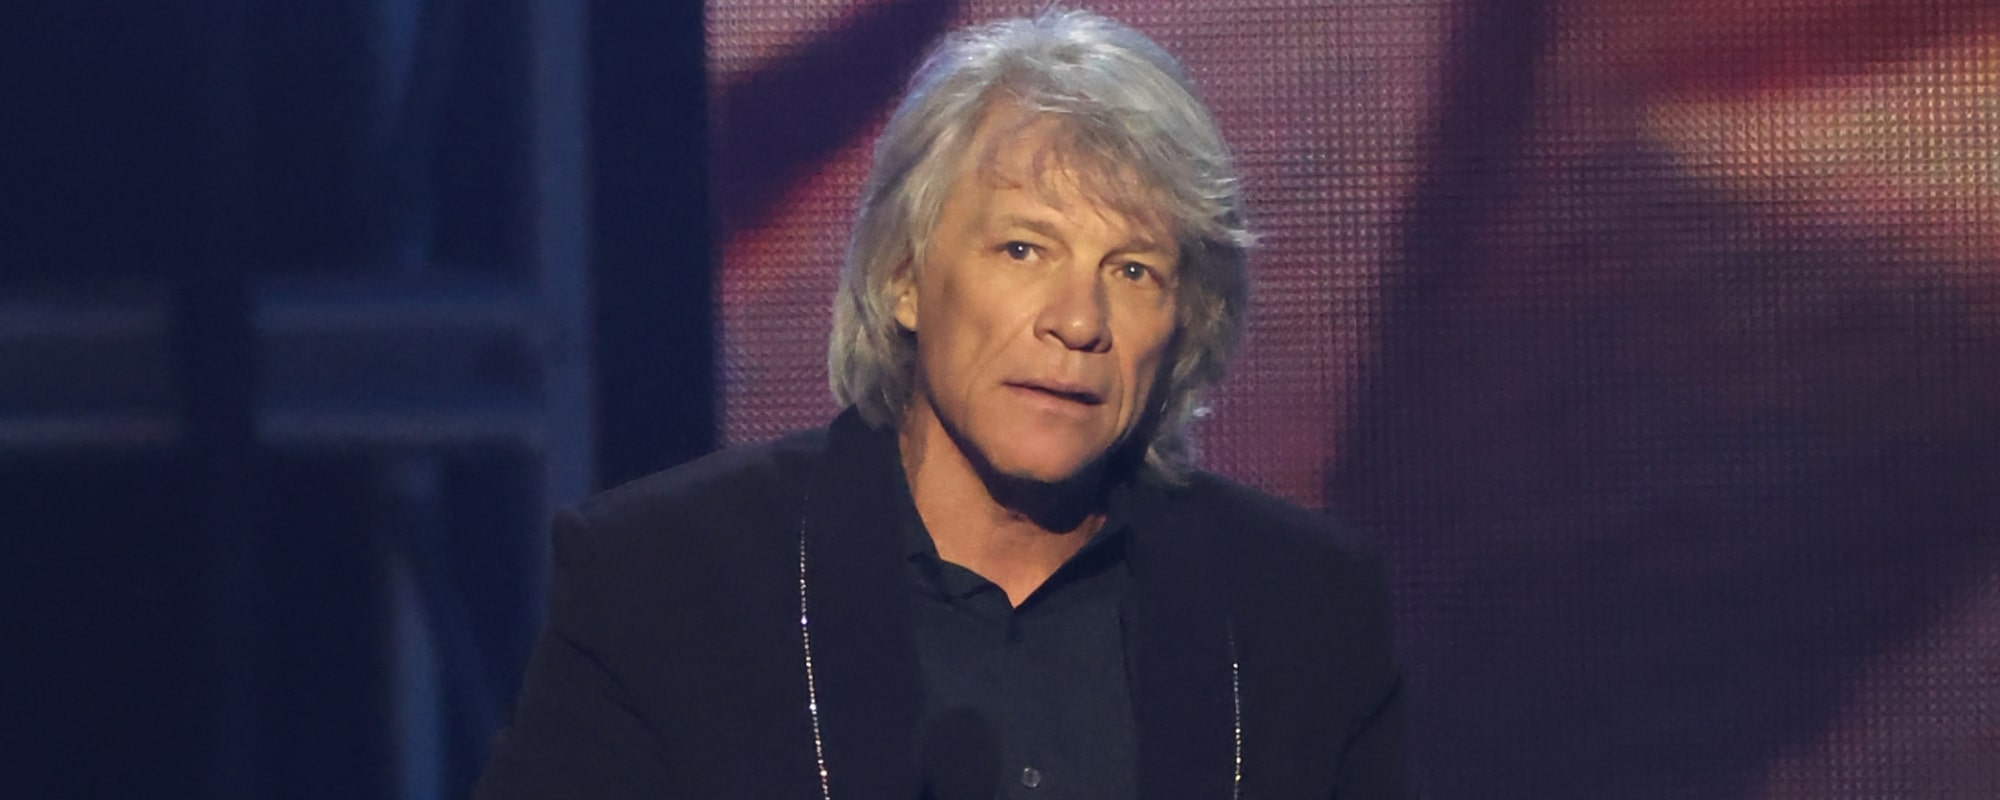 Jon Bon Jovi Casts Doubt on Ever Singing Live Again After Vocal Cord Surgery: “I Don’t Ever Need to Be the Fat Elvis”